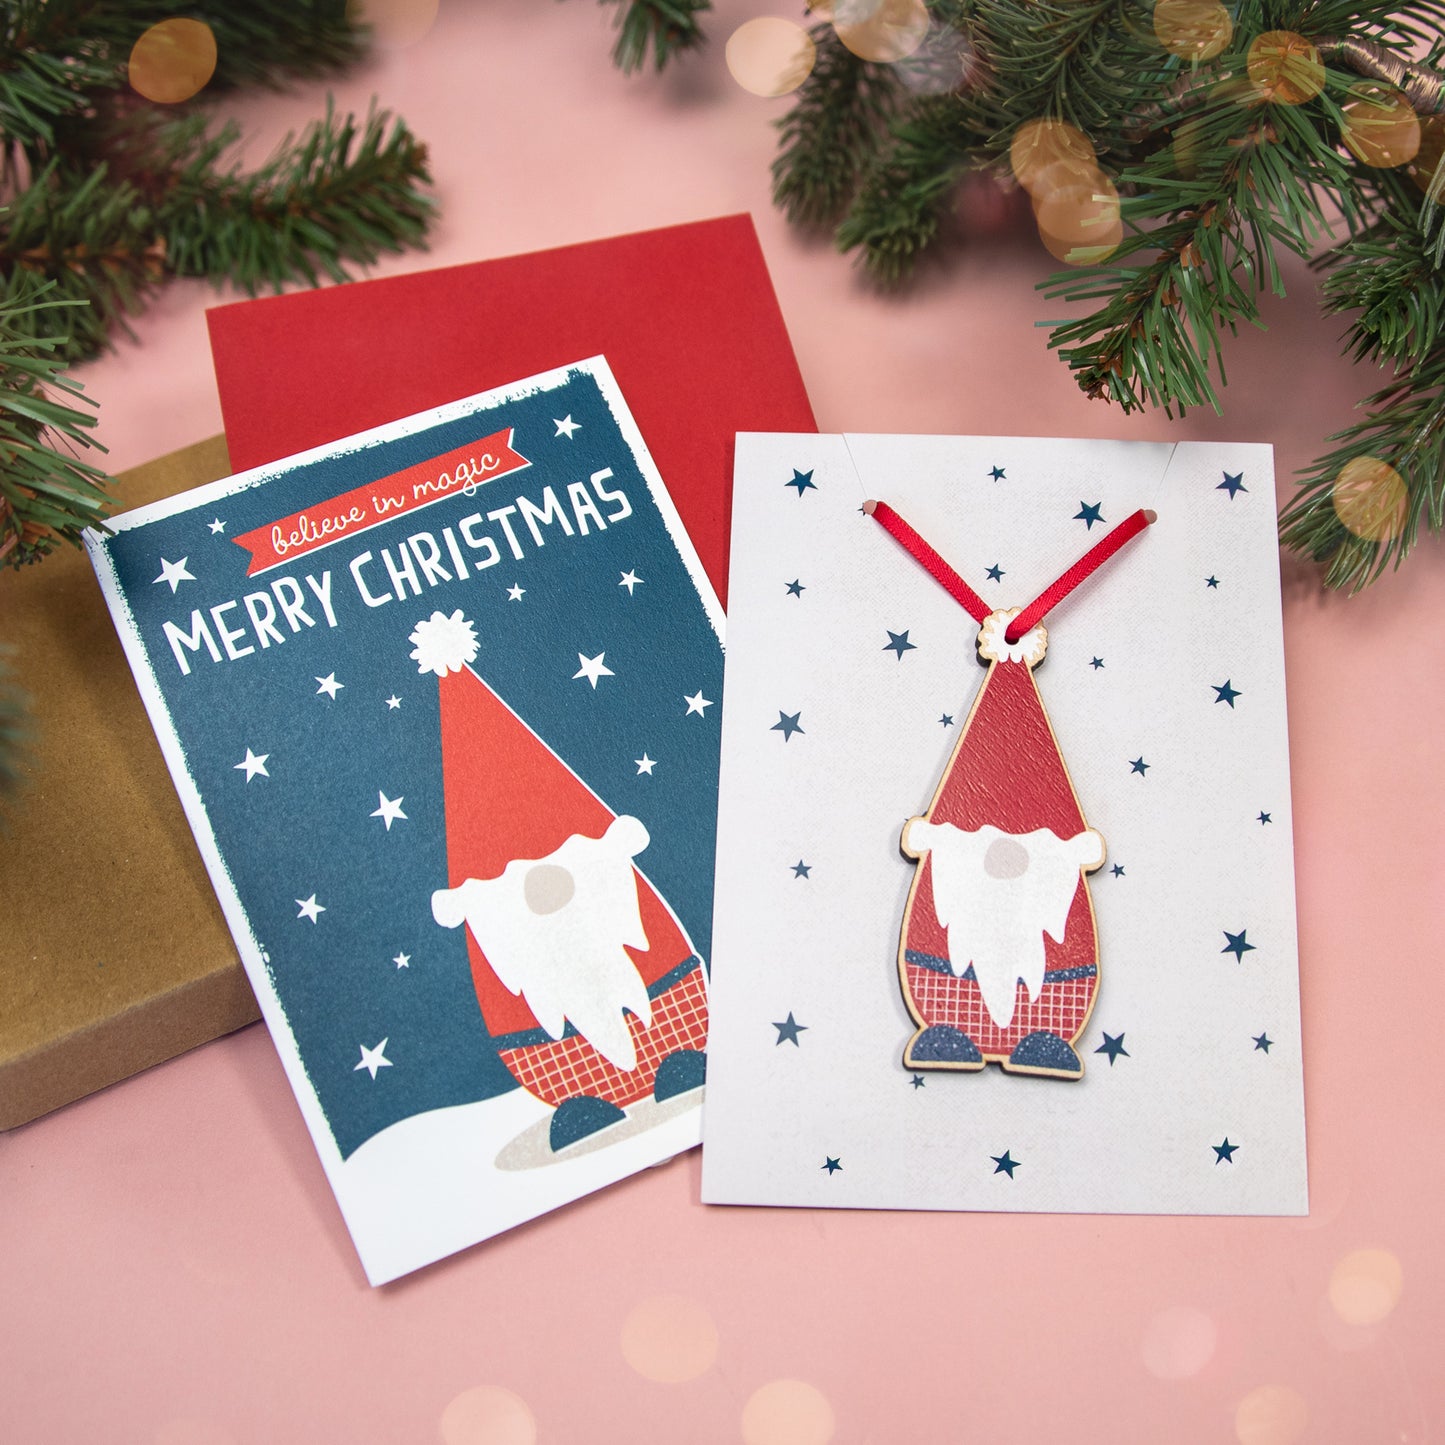 Send direct to recipient – Christmas card and decoration